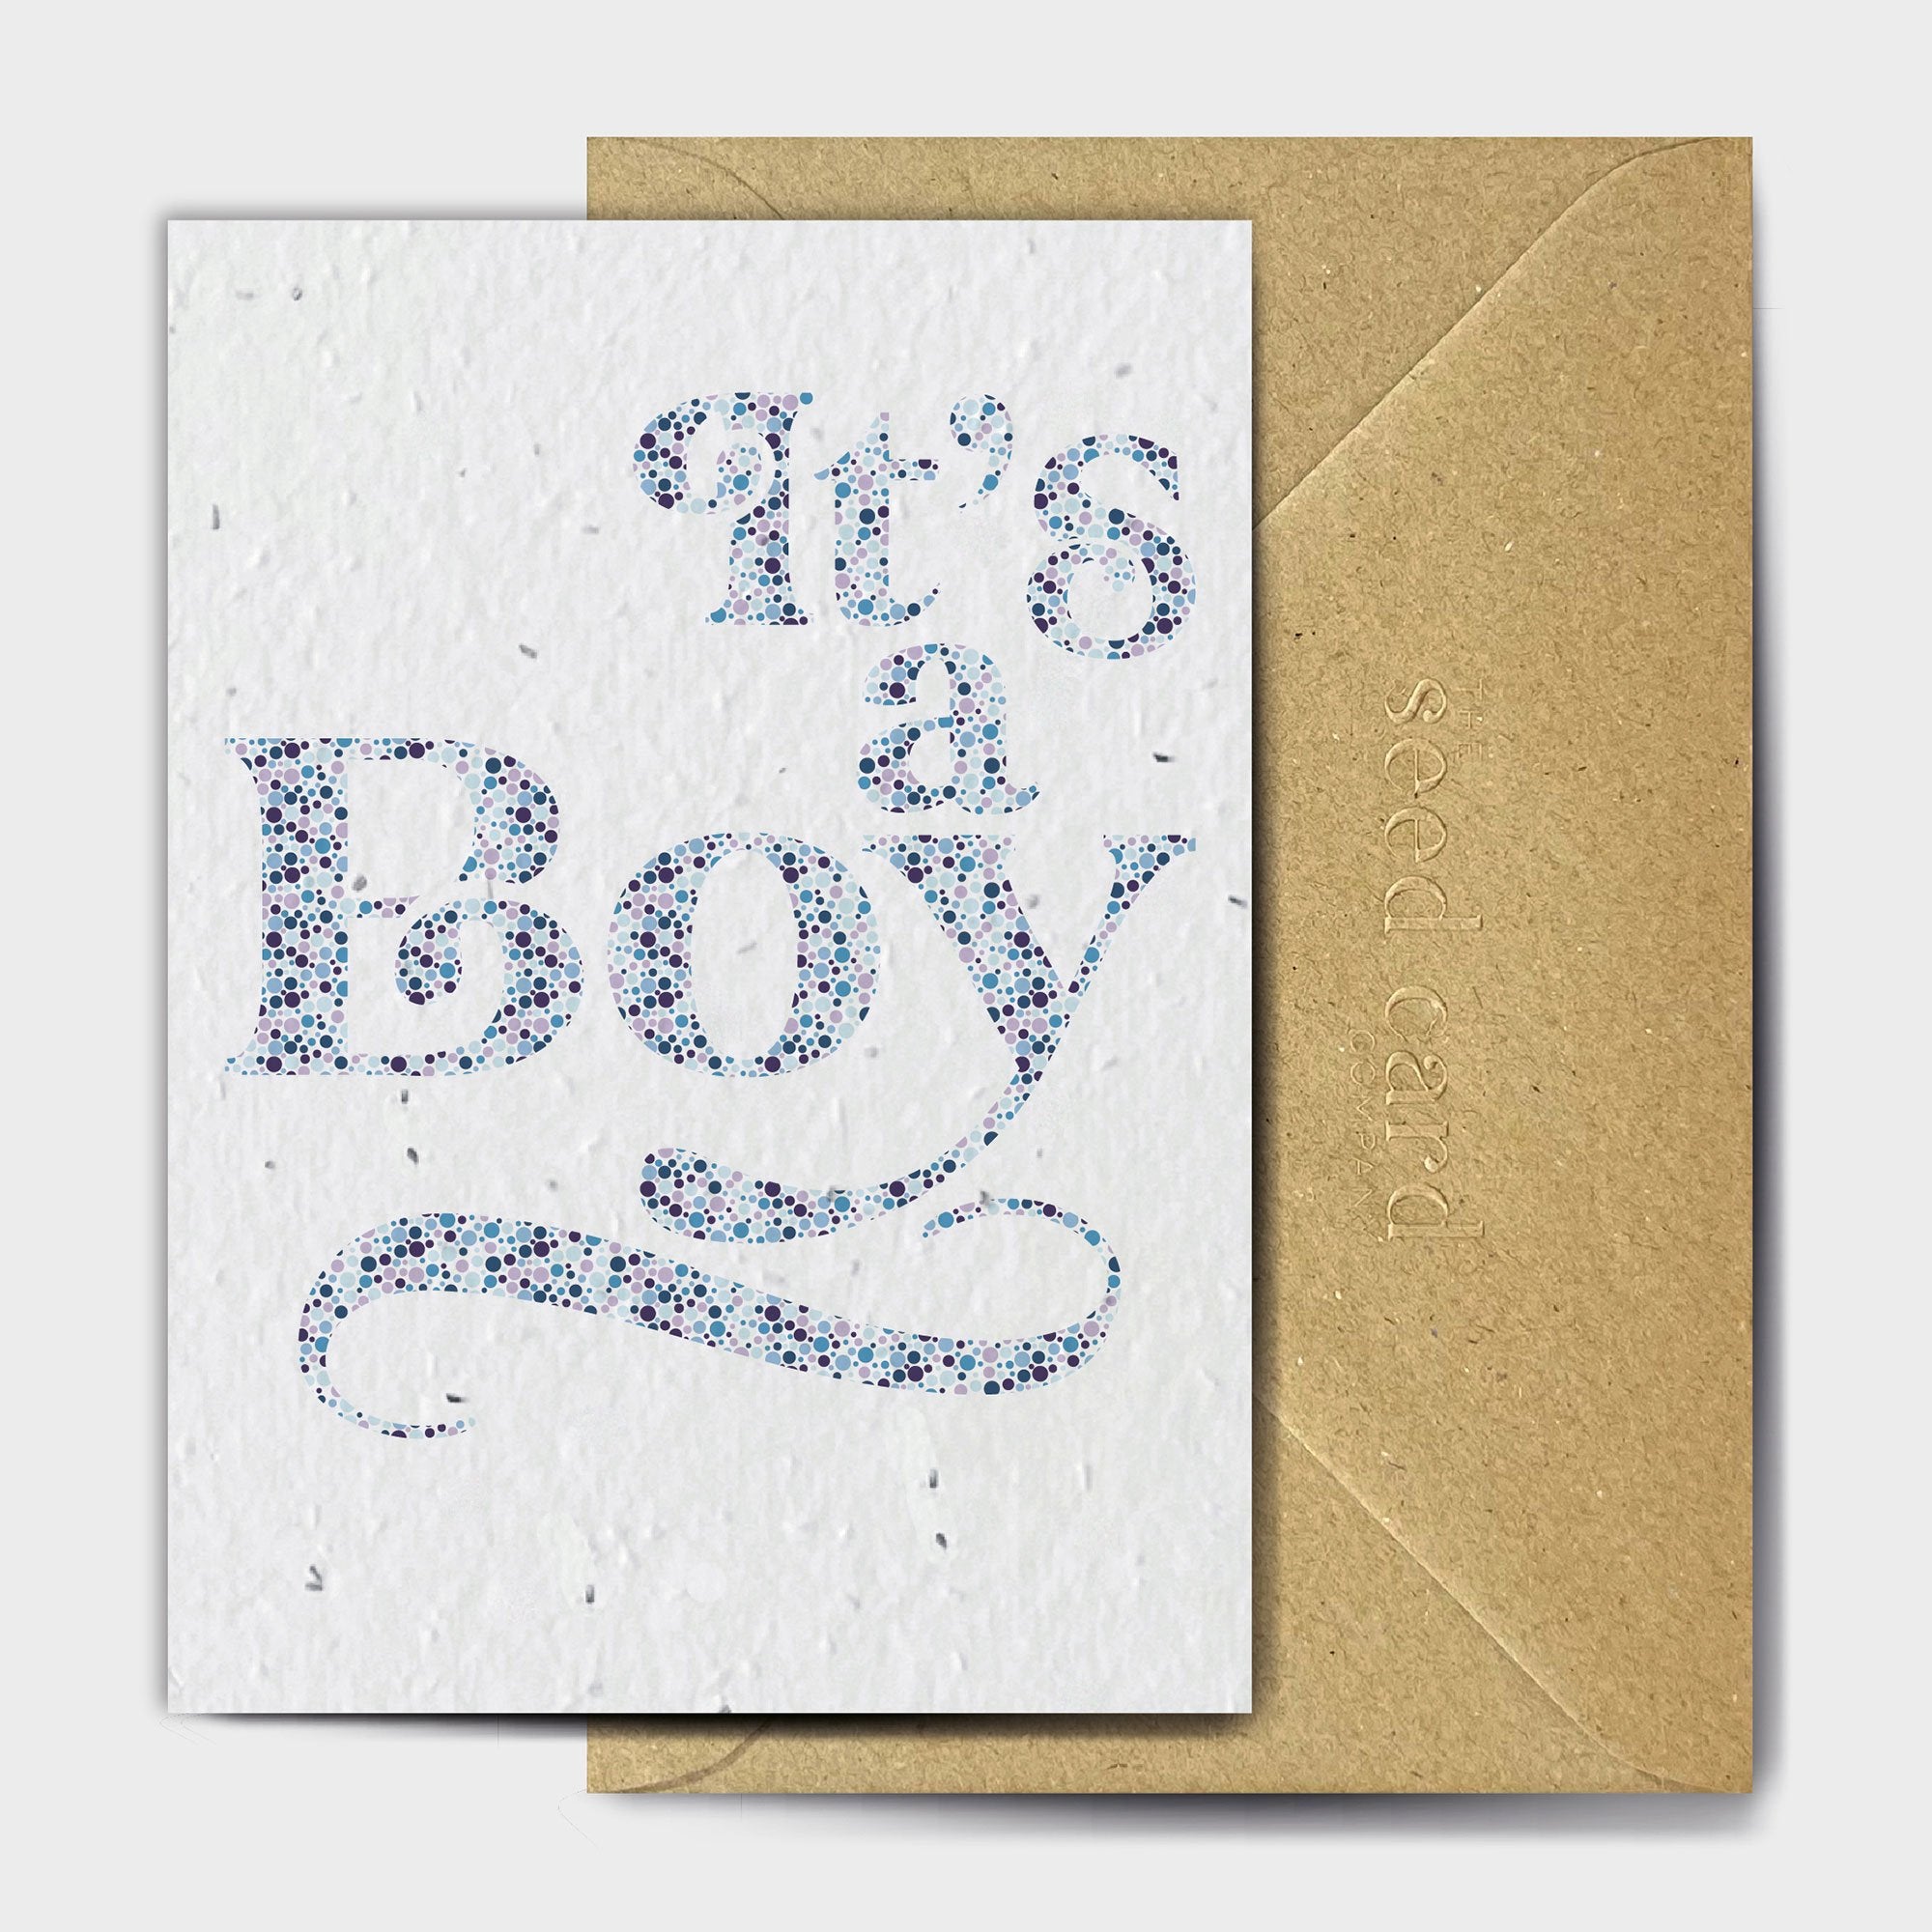 Shop online It's a Dotty Boy - 100% biodegradable seed-embedded cards Shop -The Seed Card Company